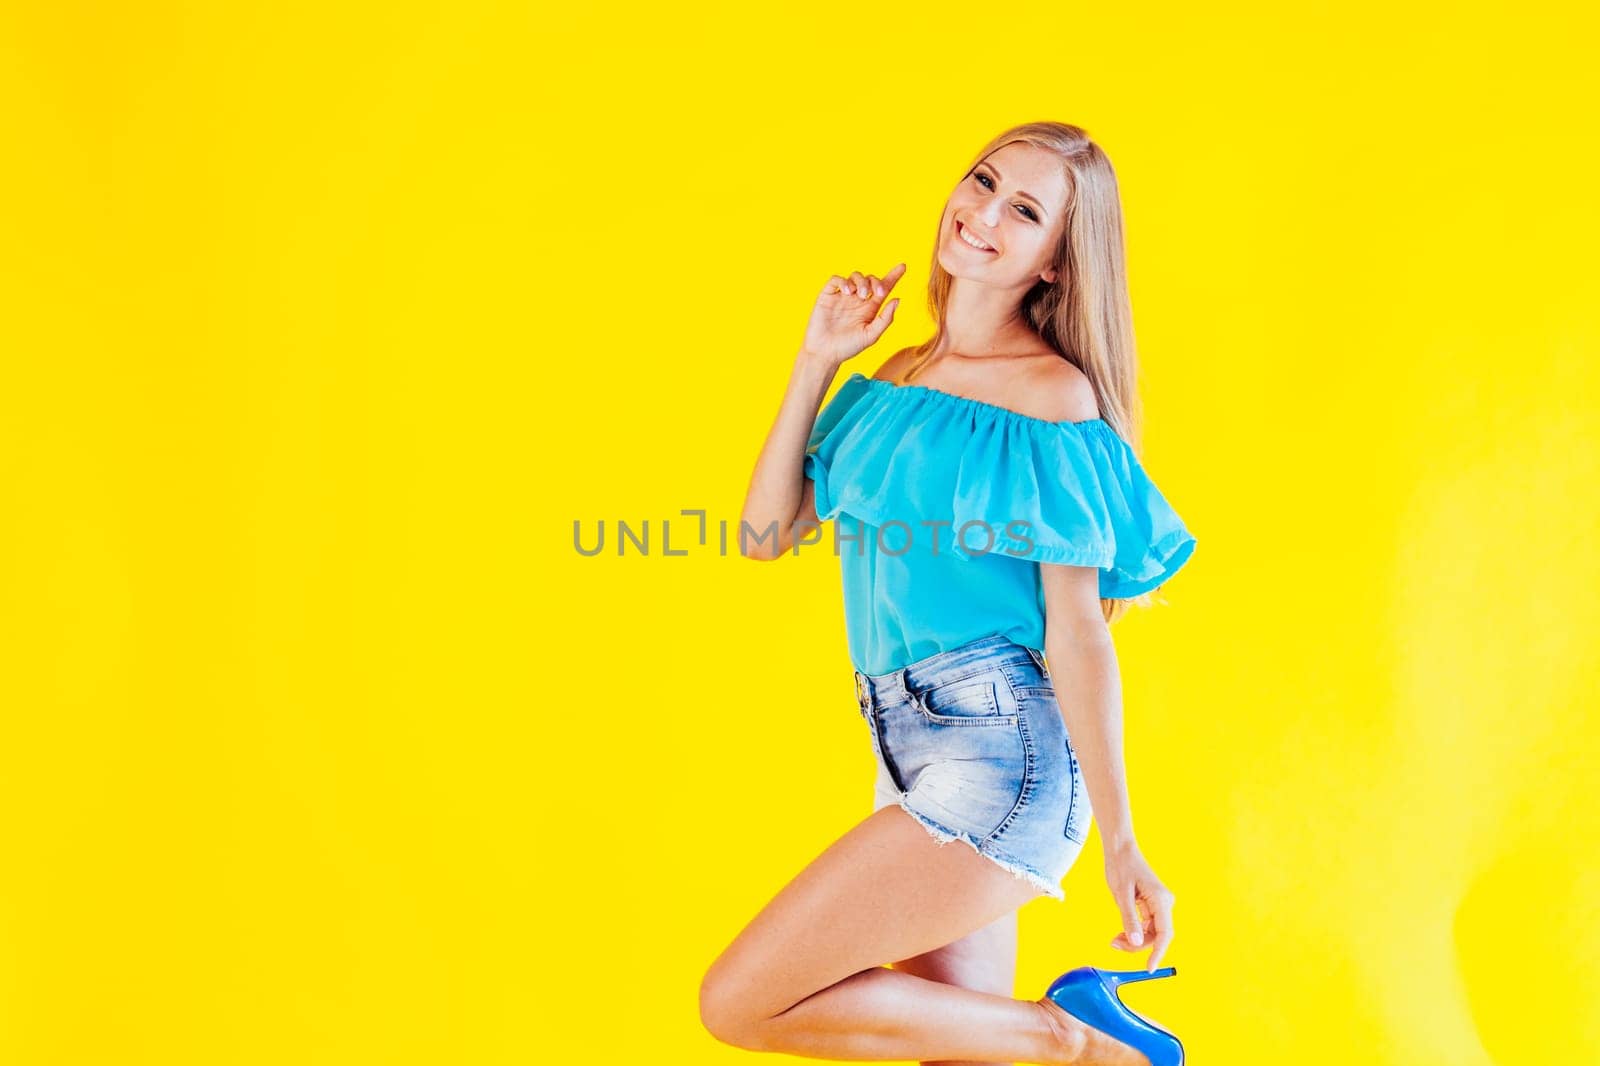 beautiful blonde girl on a yellow background in blue dress 1